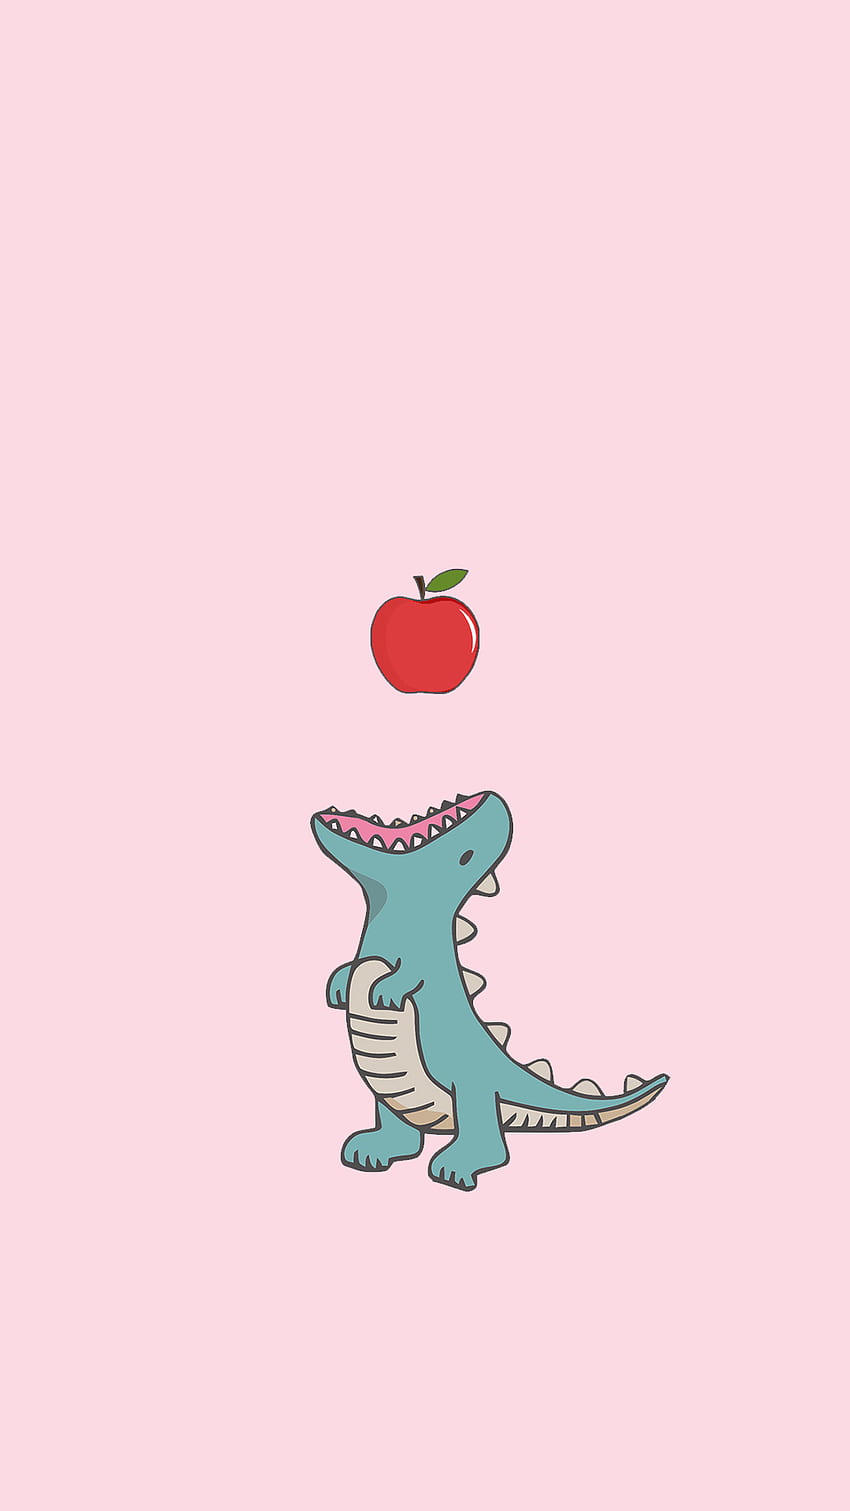 Download Keep It Cute With This Adorable Dinosaur iPhone Wallpaper  Wallpaper  Wallpaperscom